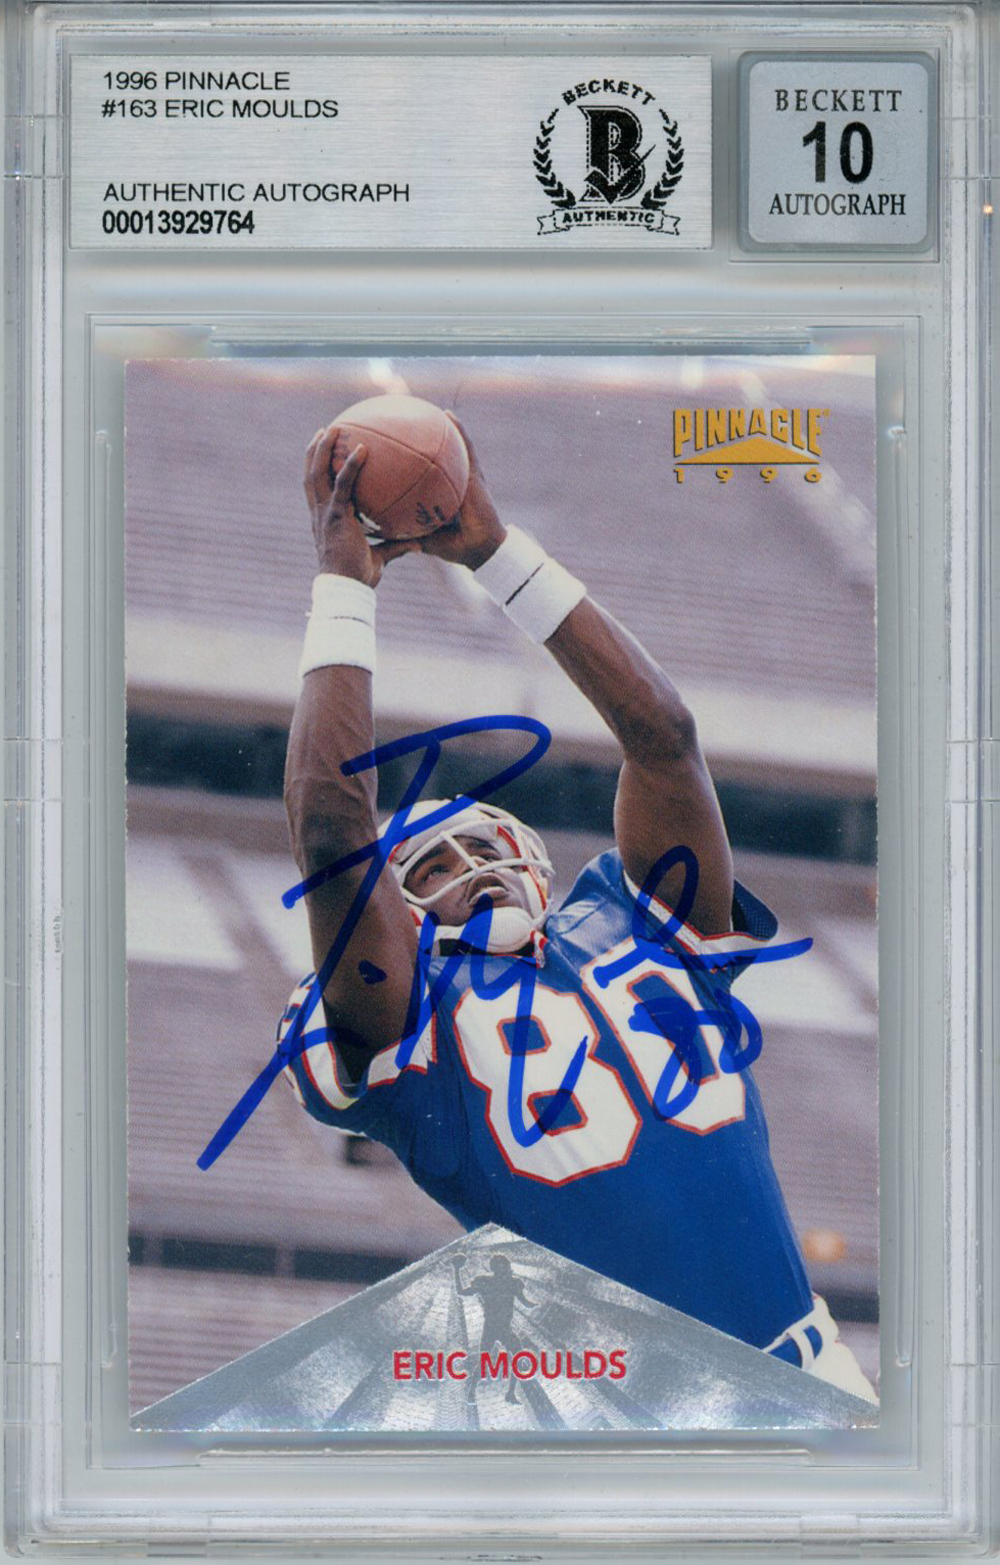 Eric Moulds Autographed 1996 Pinnacle #163 Rookie Card Beckett 10 Slab